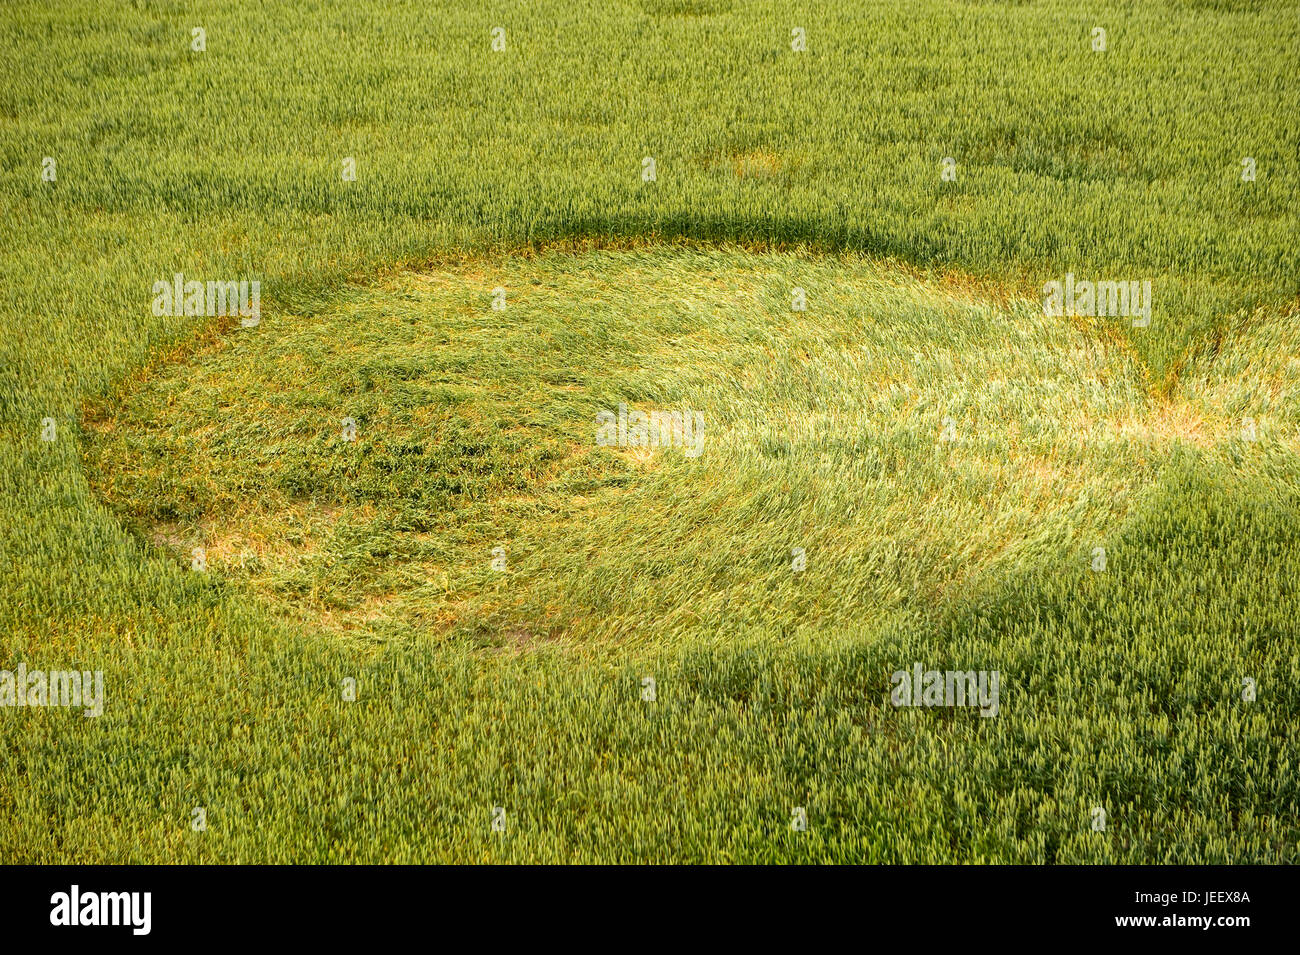 Mysterious Crop Circle In A Wheat Field Near The City Of Lochem In The